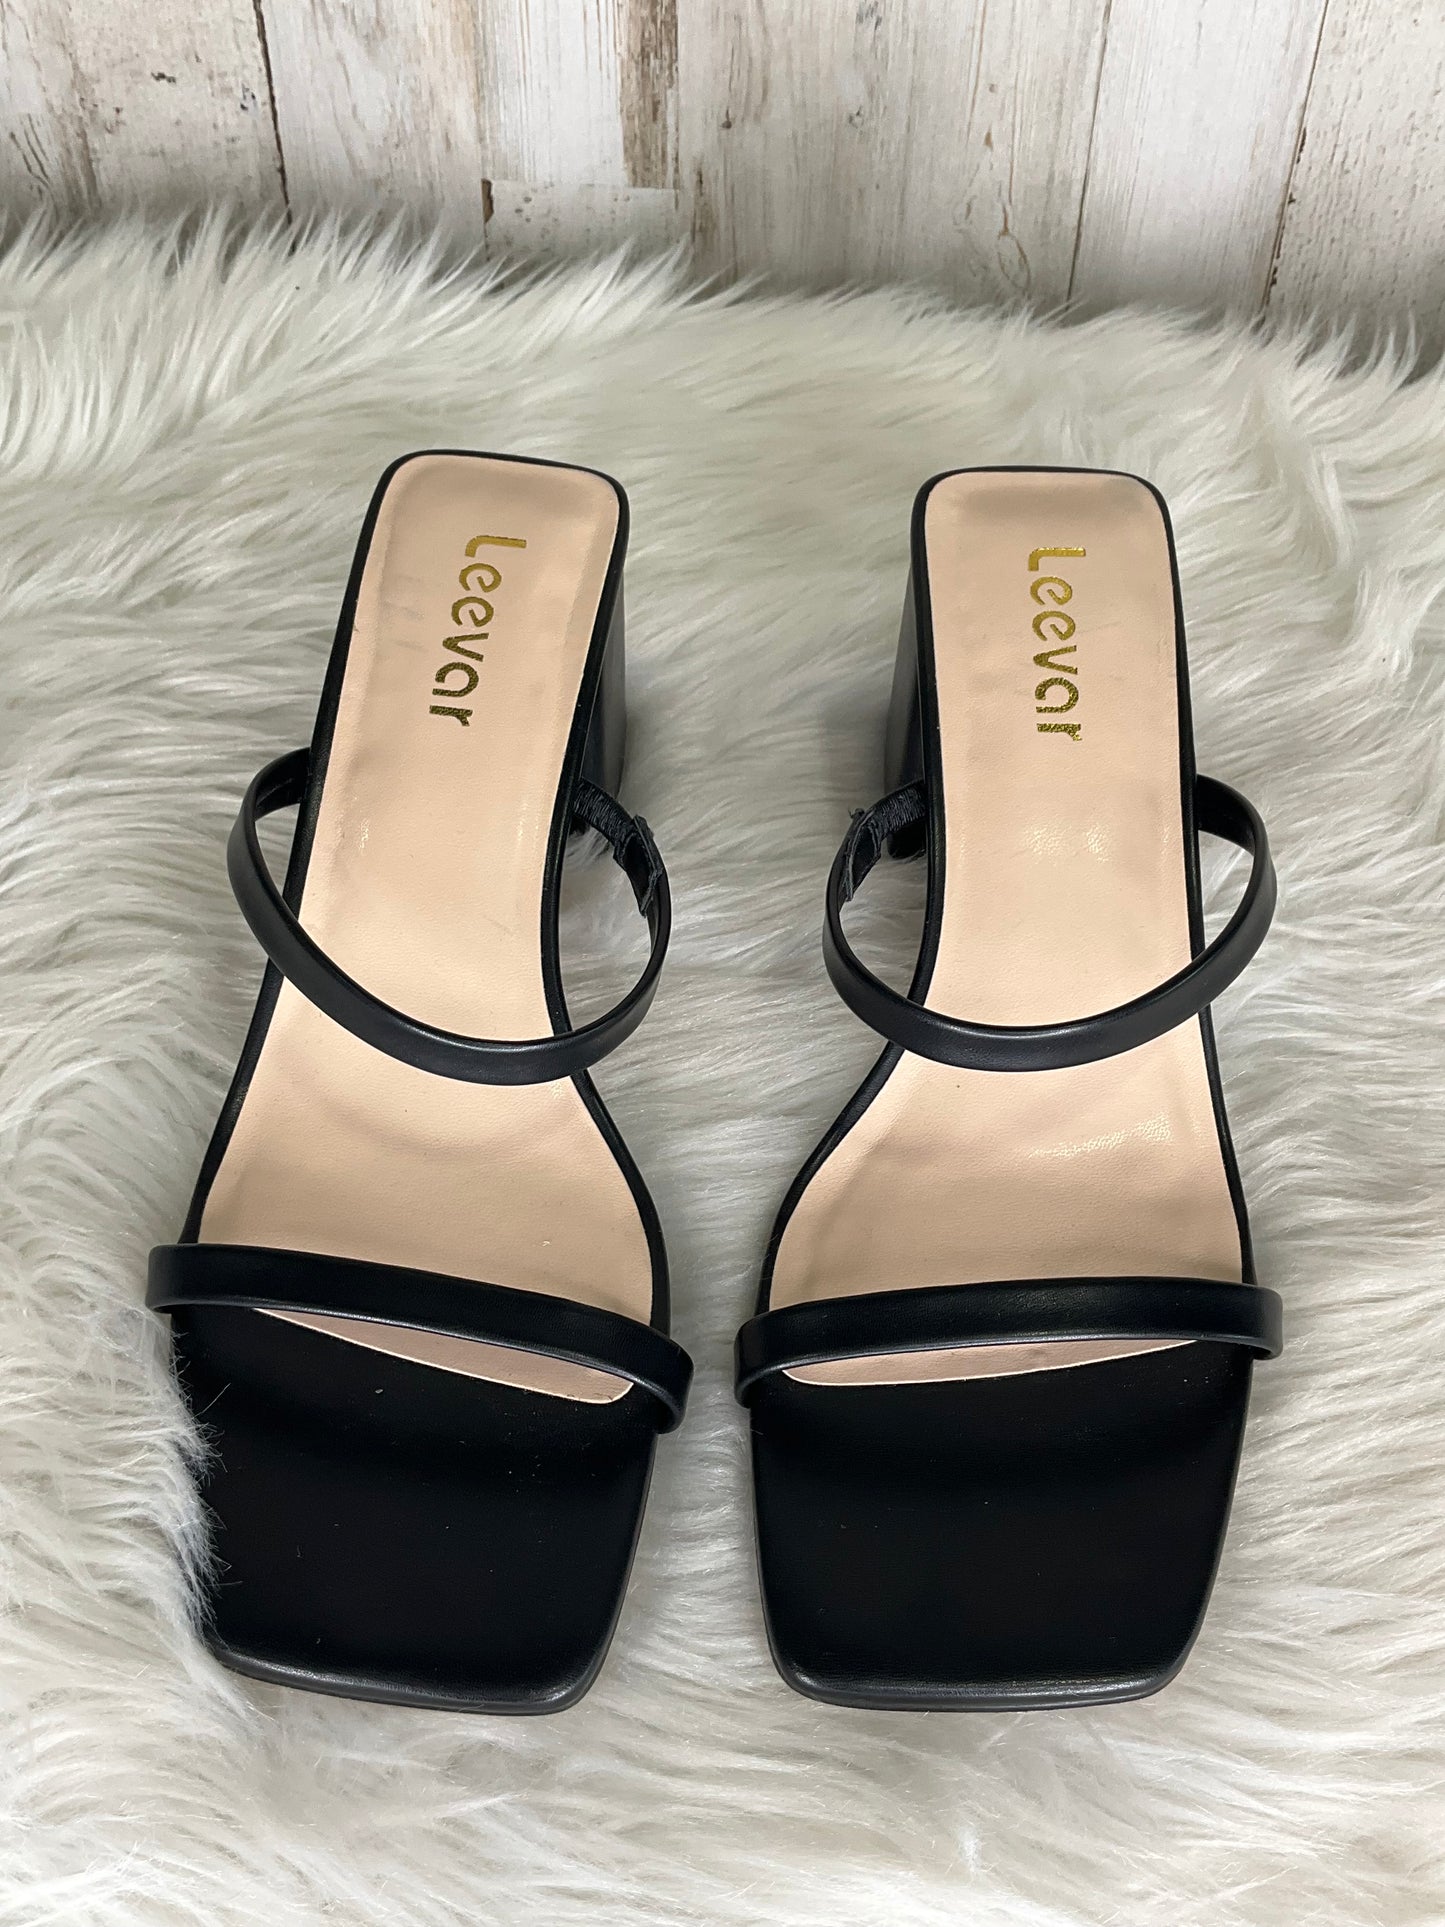 Sandals Heels Block By Clothes Mentor  Size: 6.5